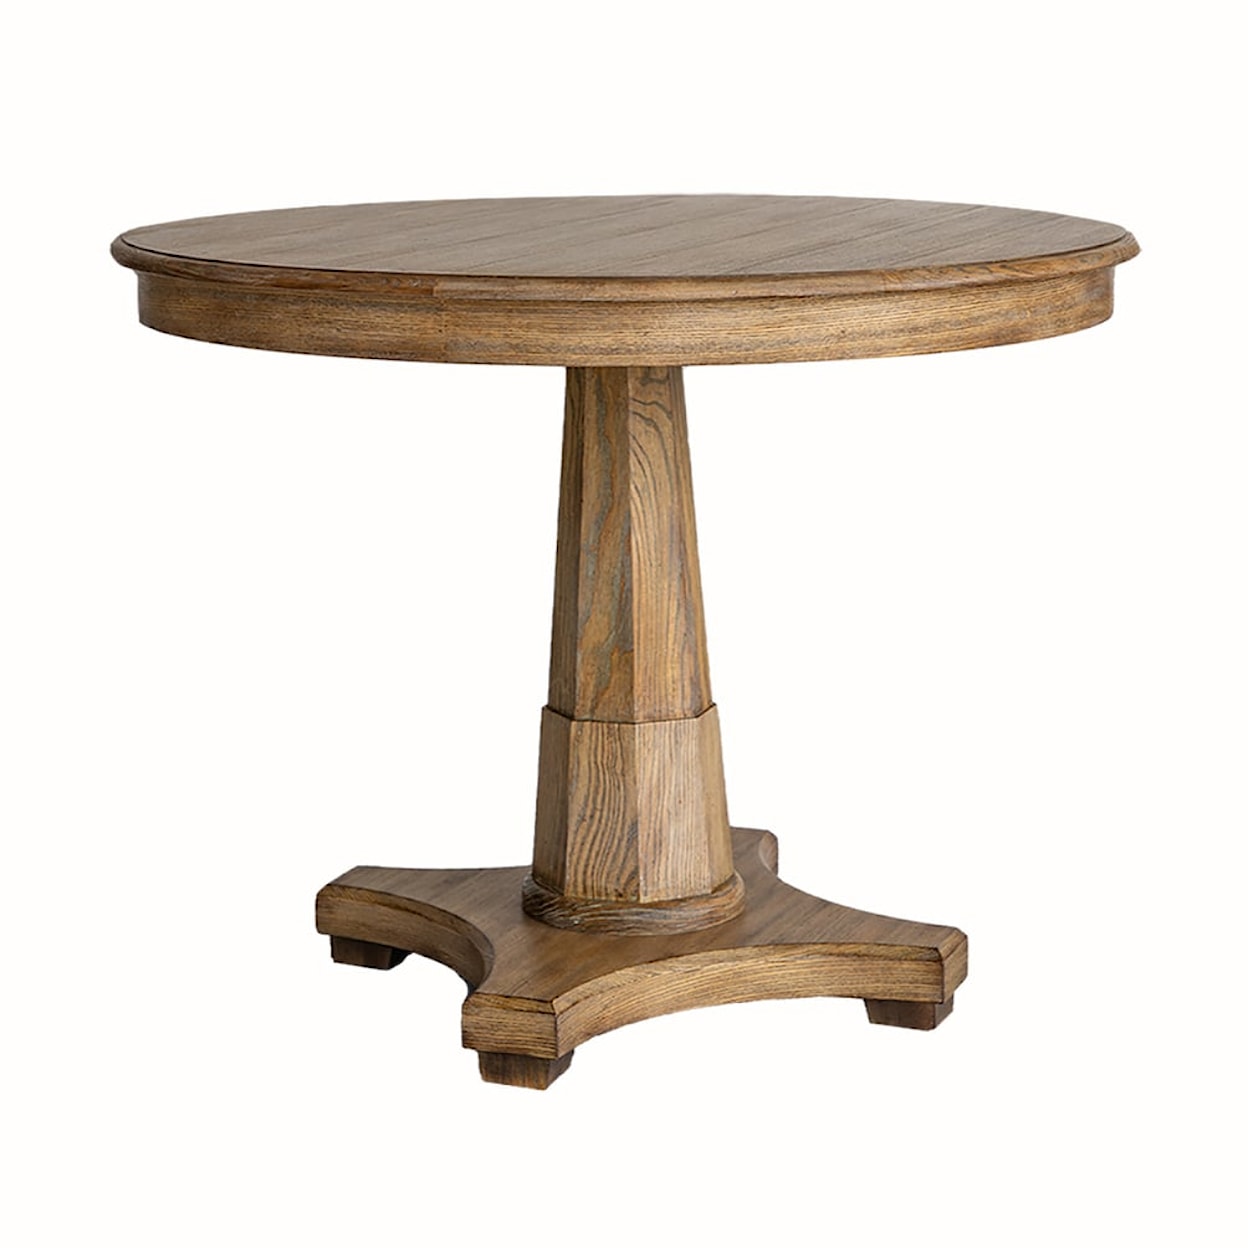 Oliver Home Furnishings Dining Tables OGEE TOP PEDESTAL TABLE- OATMEAL